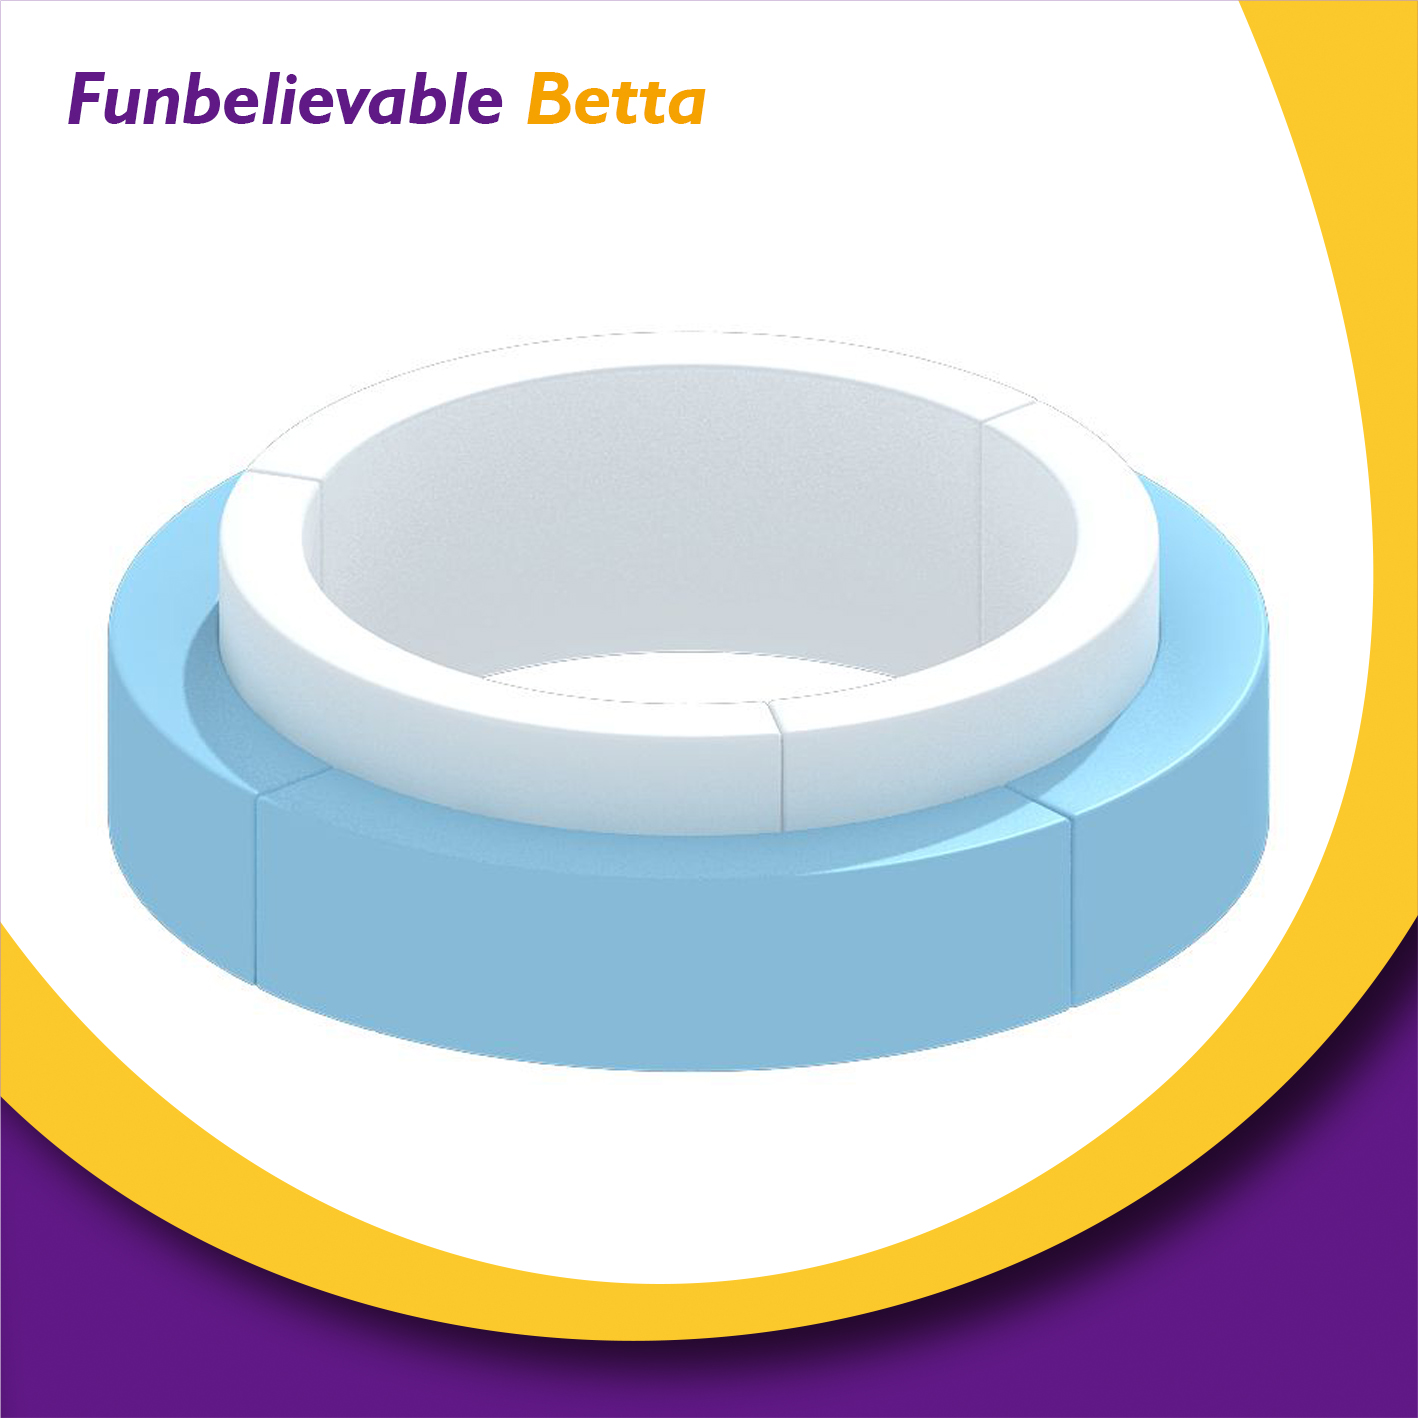 Bettaplay party rental soft play big round ball pit for indoor playground